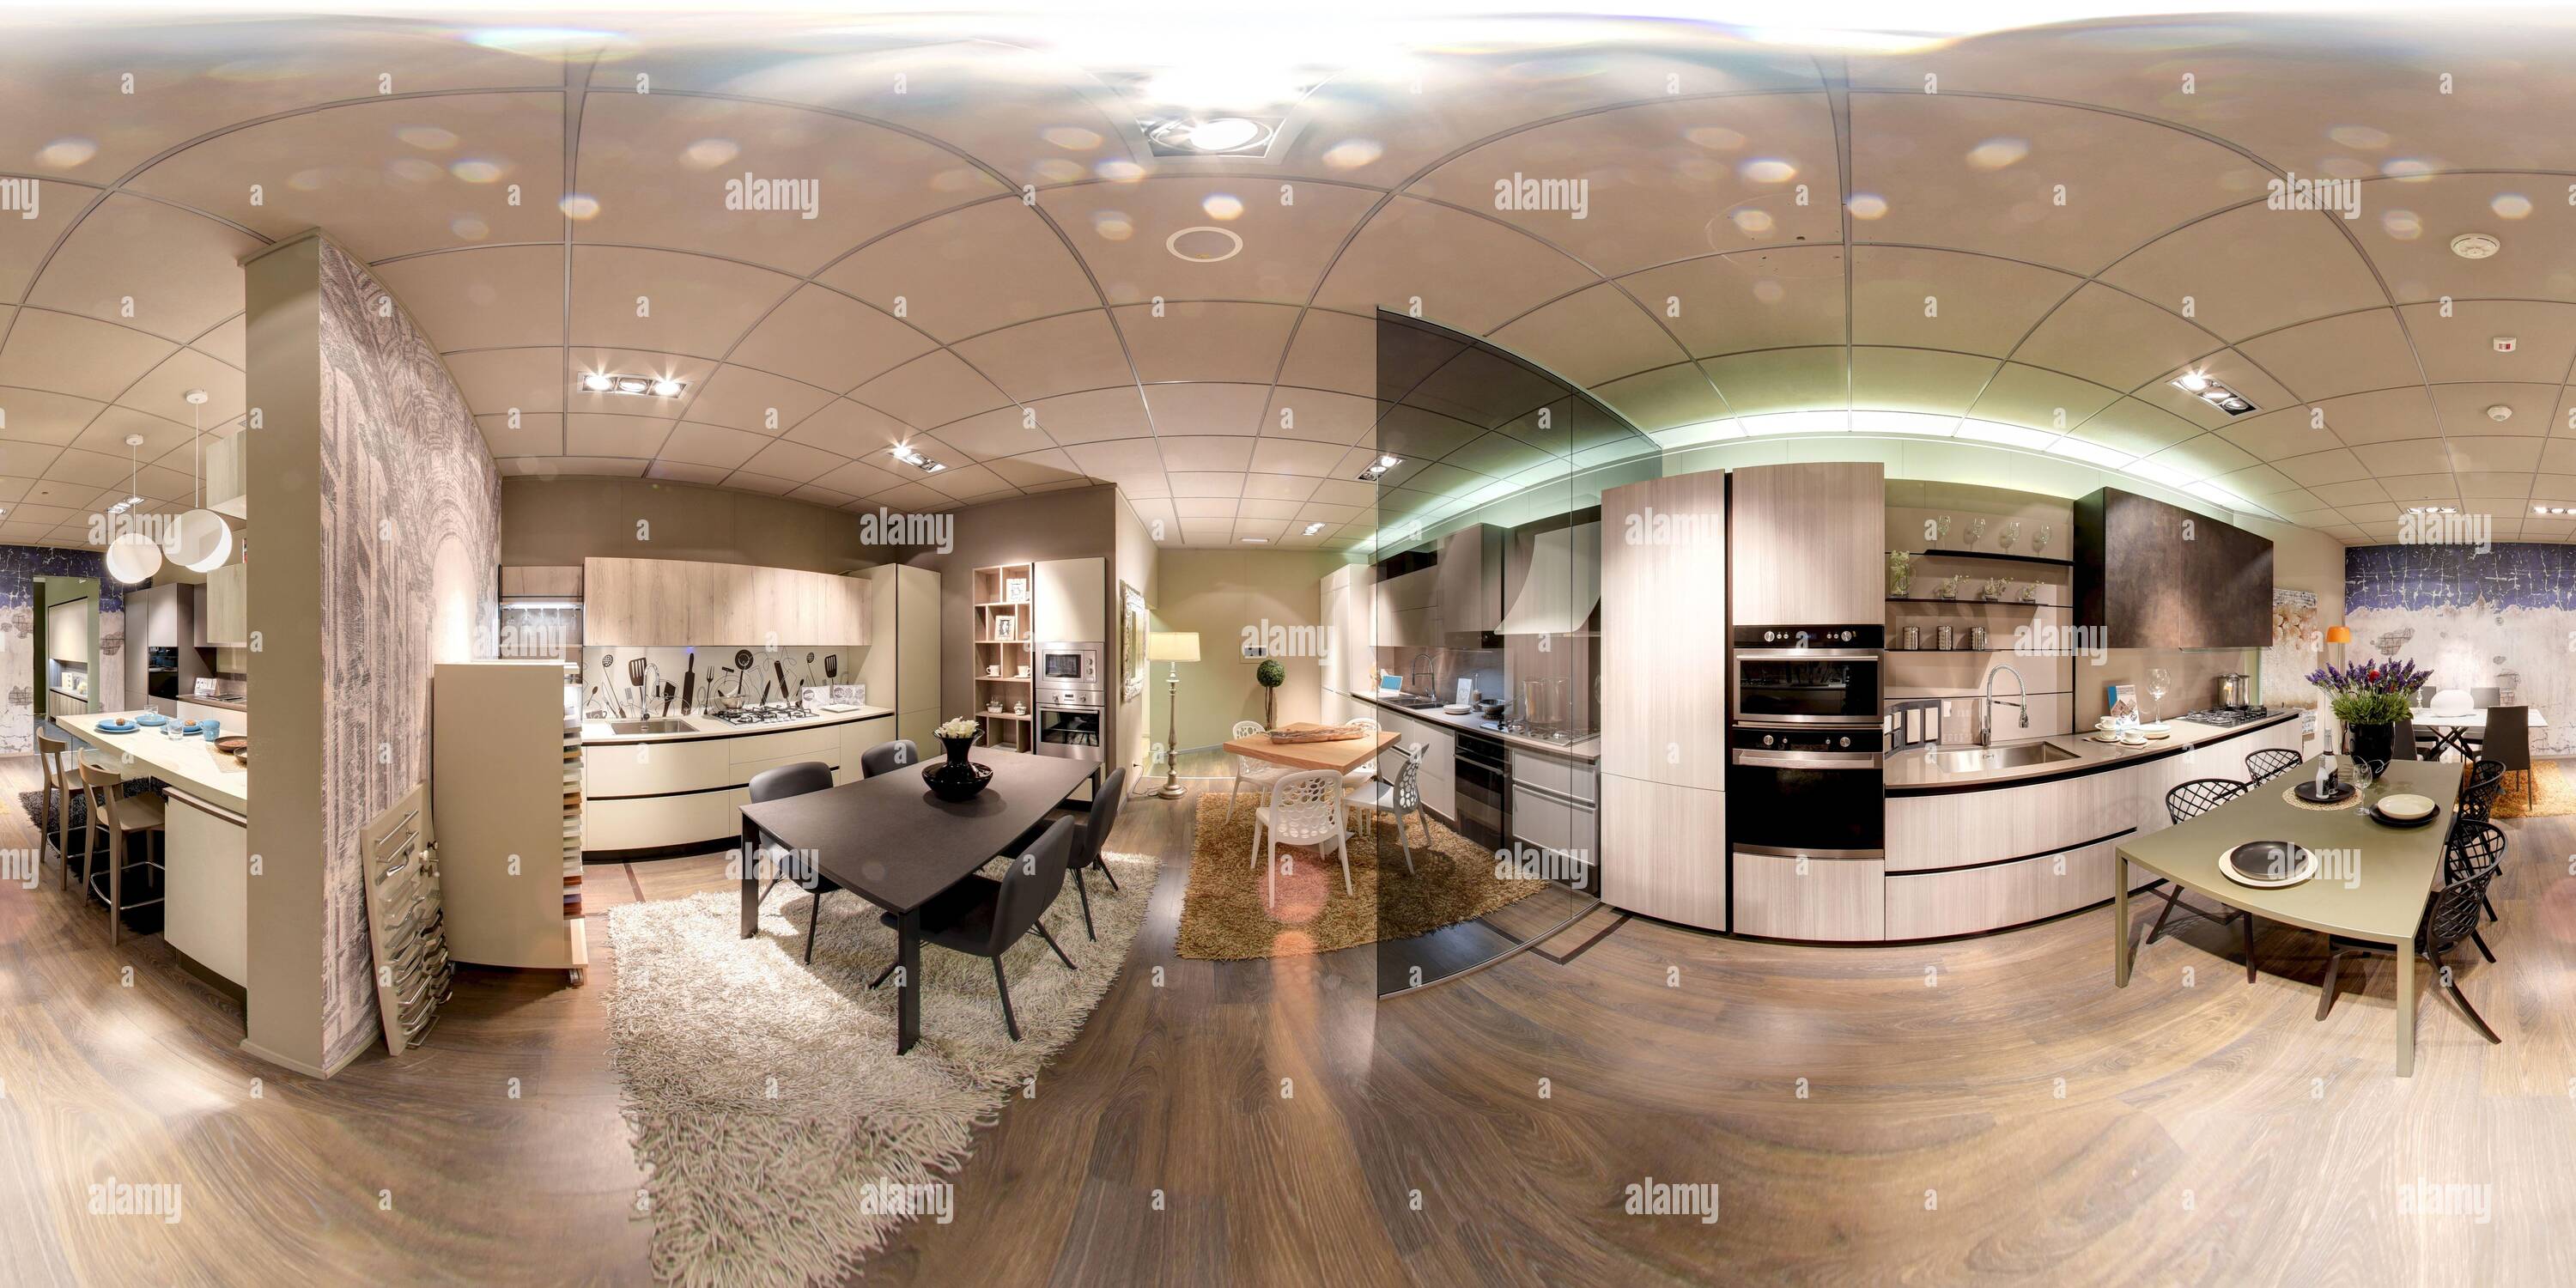 360 degree panoramic view of 360 degree panorama of a furniture showroom interior showing a range of different kitchens with dining areas in neutral color decor